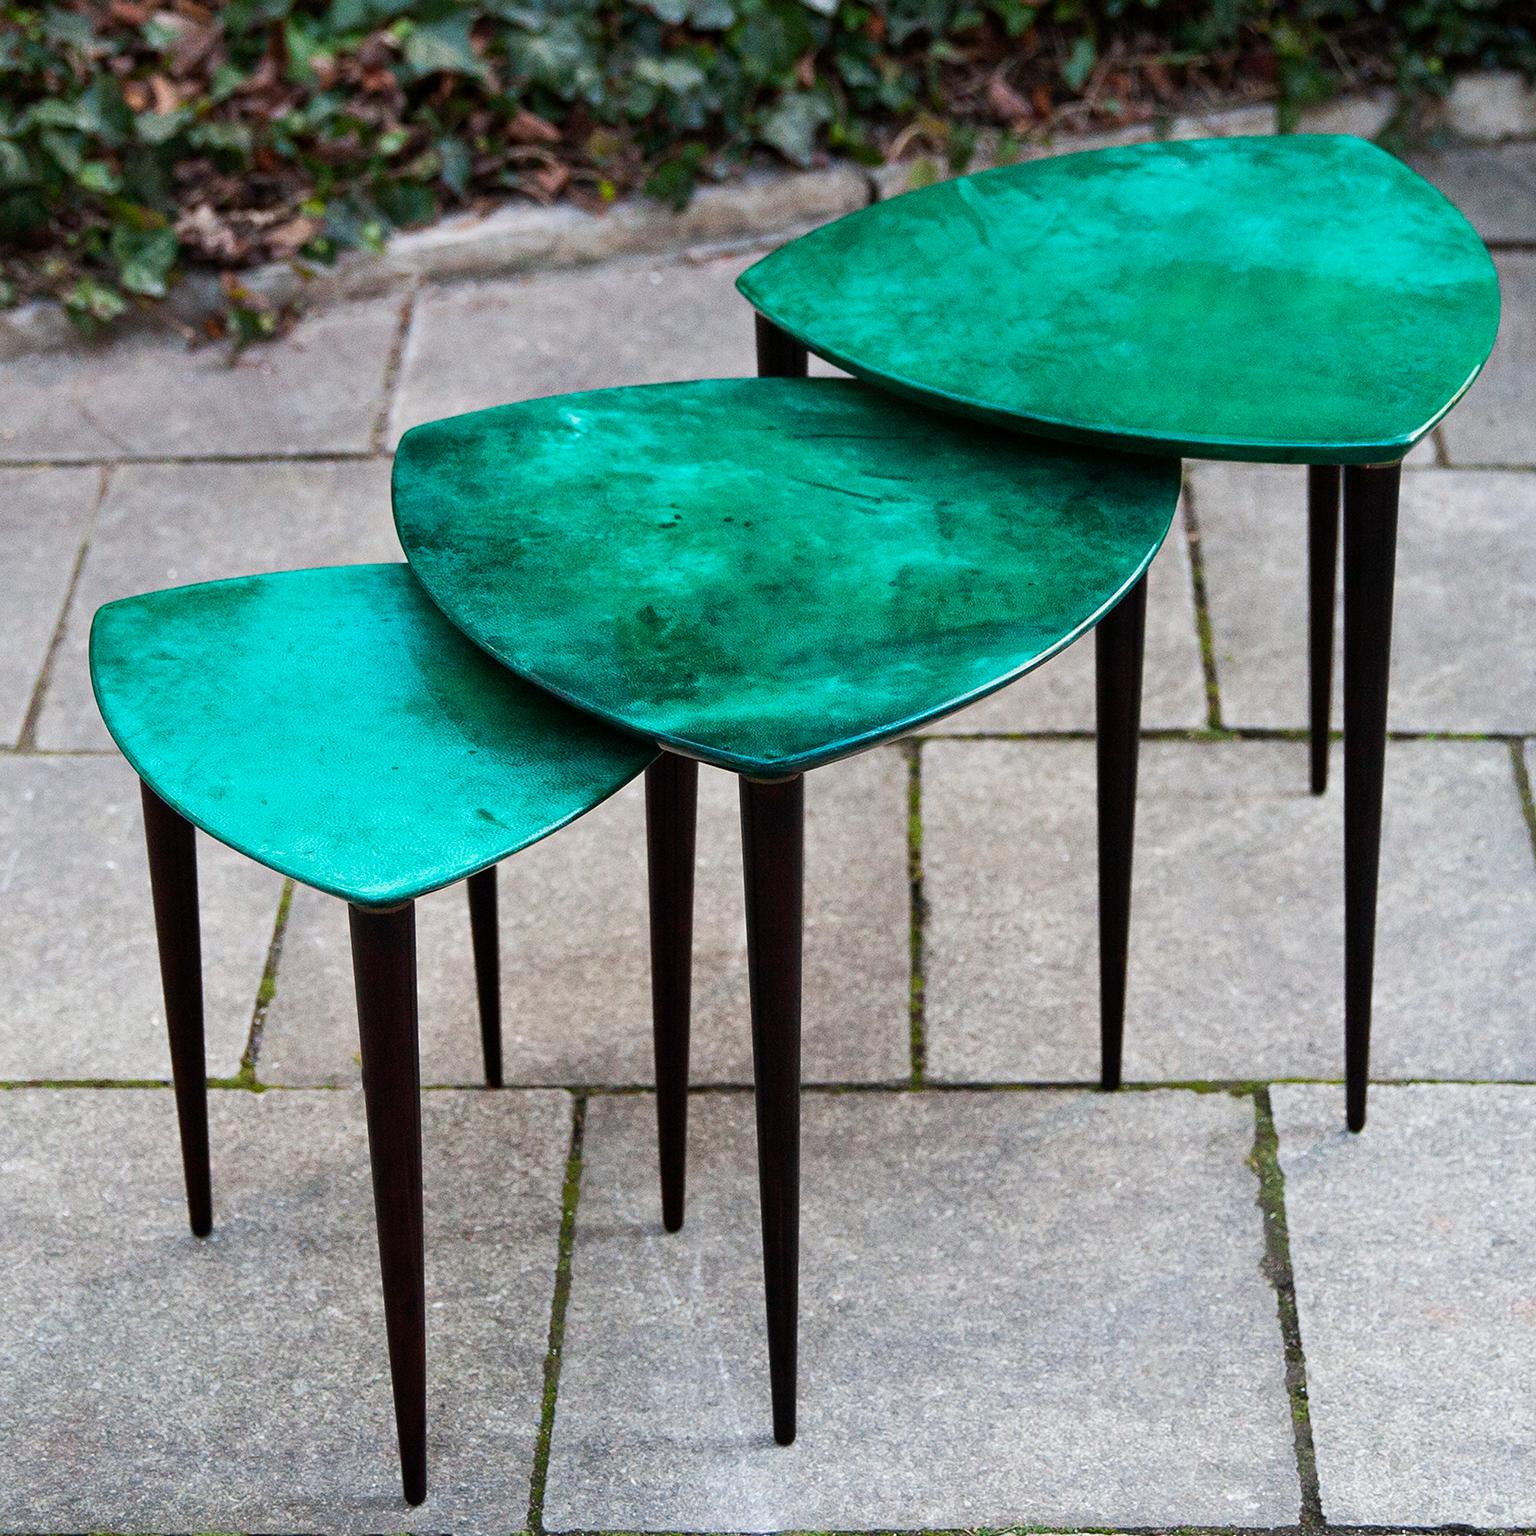 Elegant set of three nesting tables made by Aldo Tura, Italy in the 1960s.

The nesting tables was executed in lacquered green goatskin and they are in excellent condition.

Along with artists like Piero Fornasetti and Carlo Bugatti, Aldo Tura